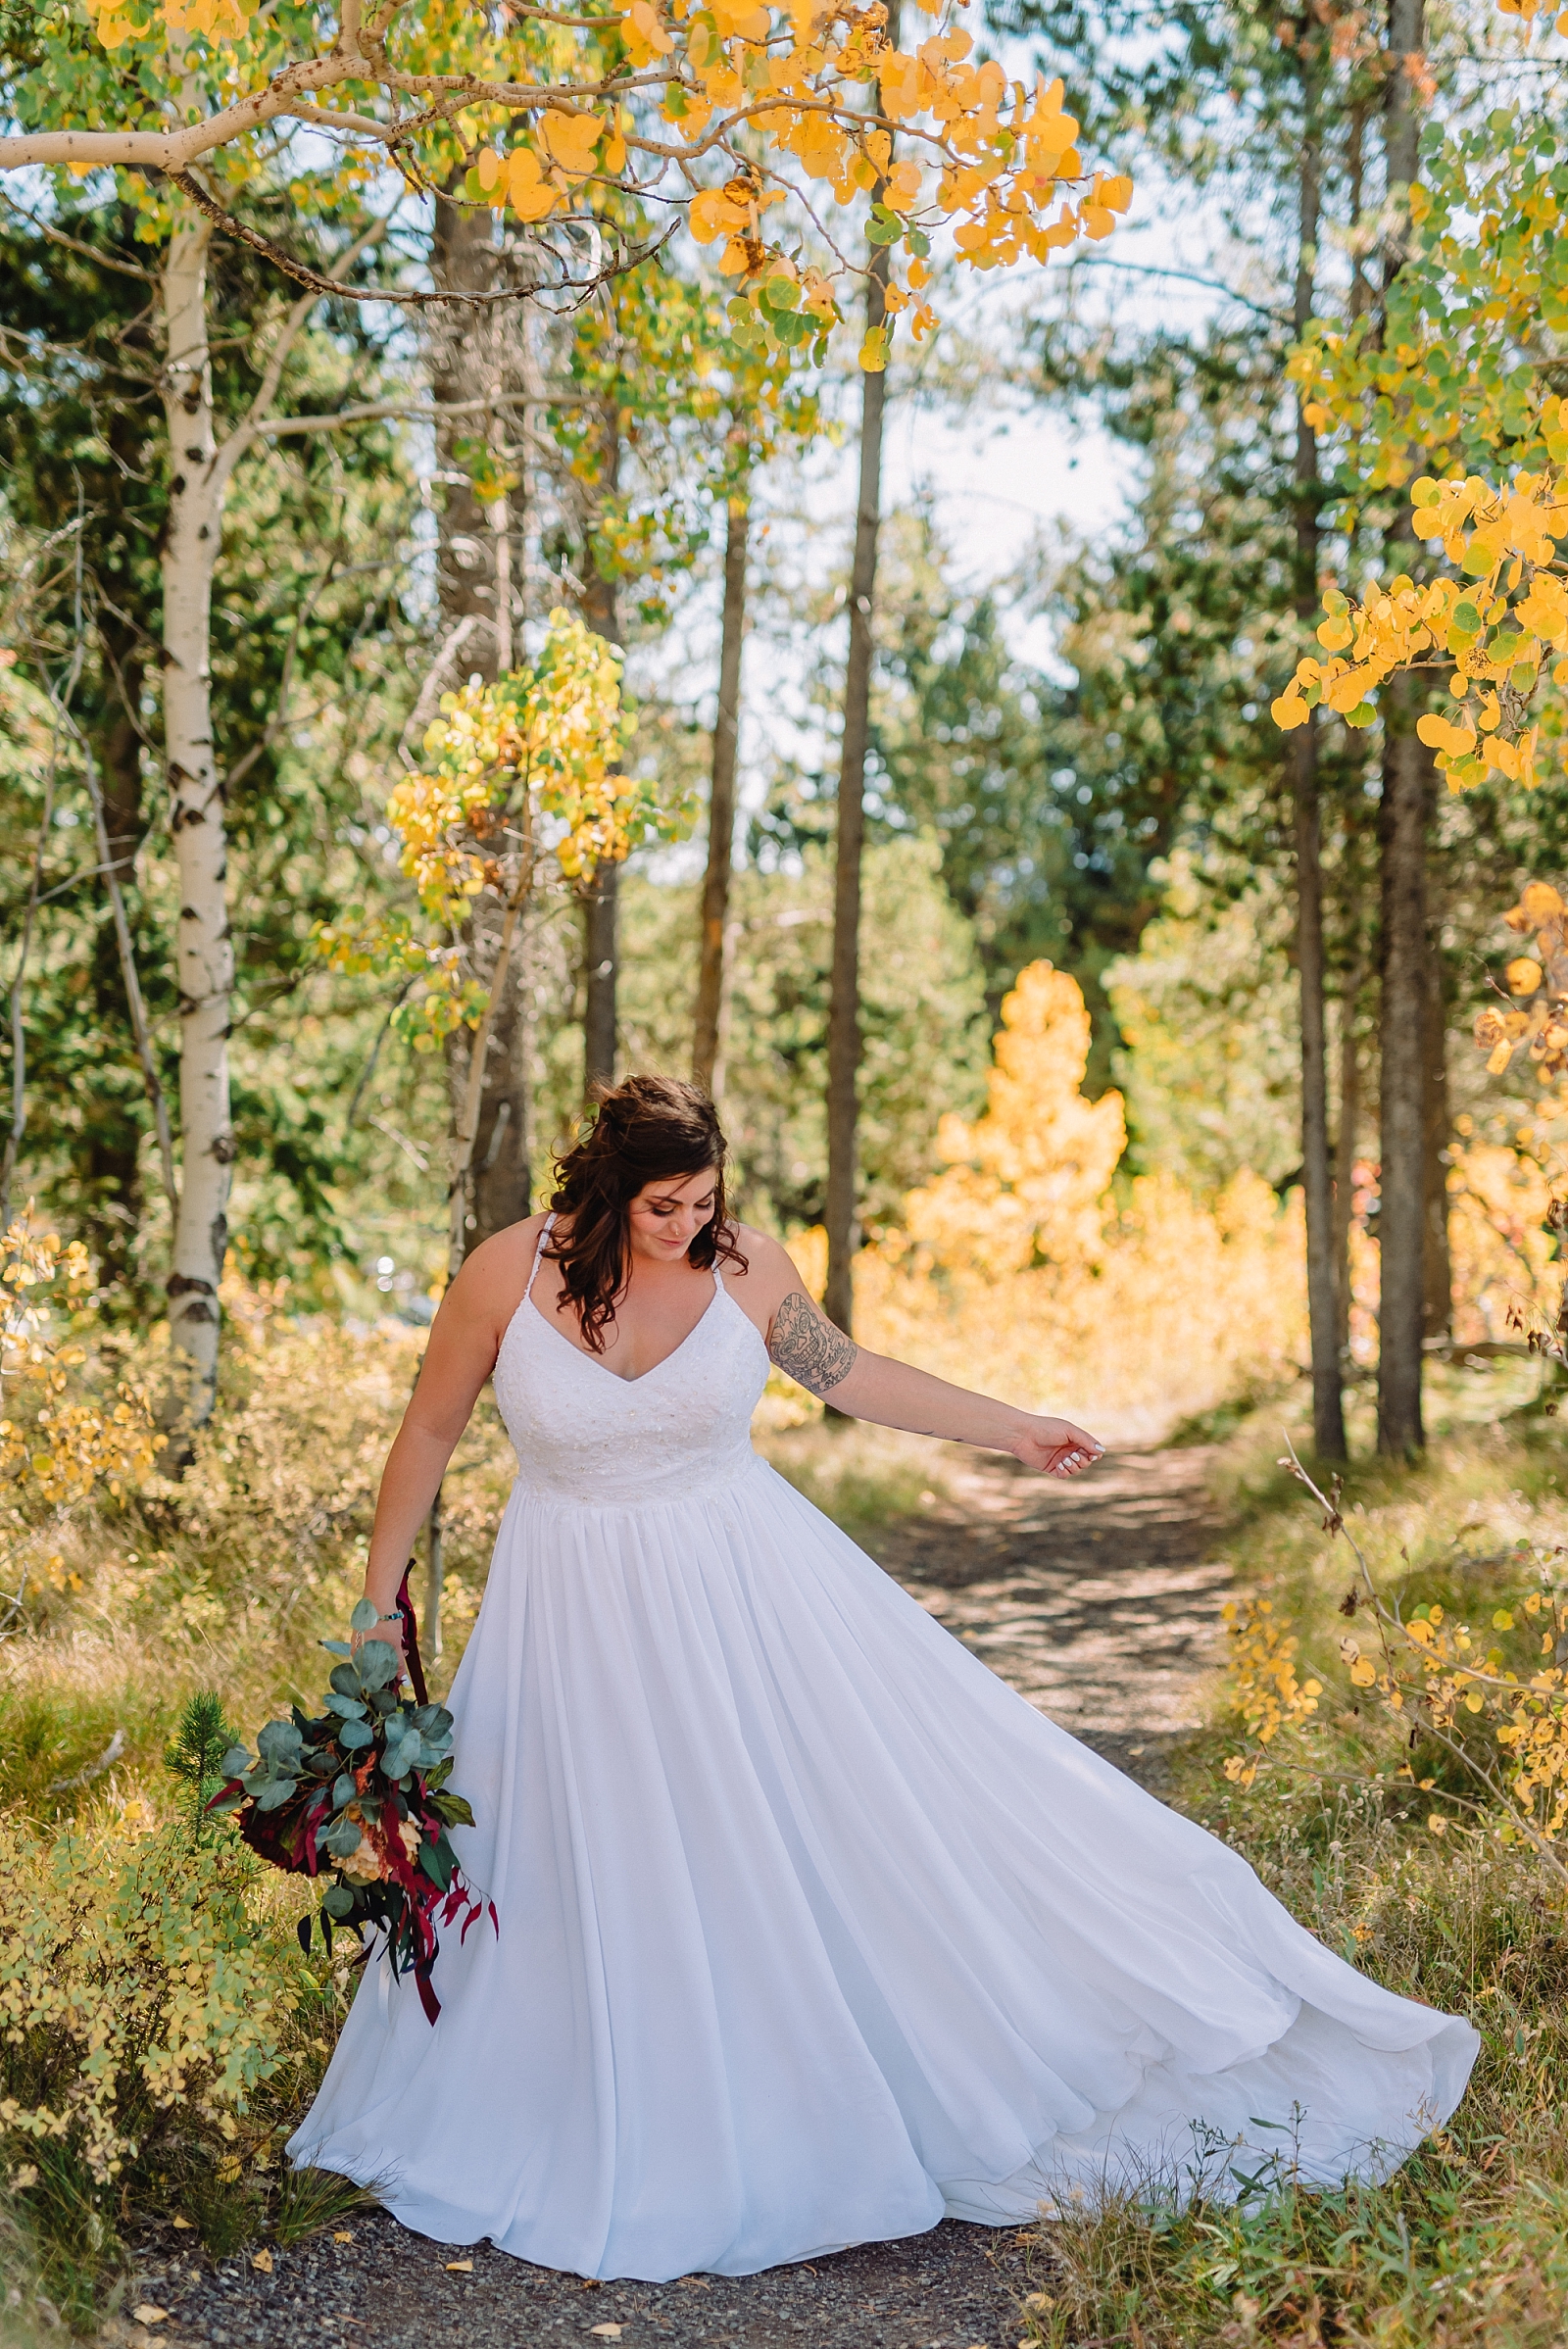 bride and groom outdoor fall wedding wyoming